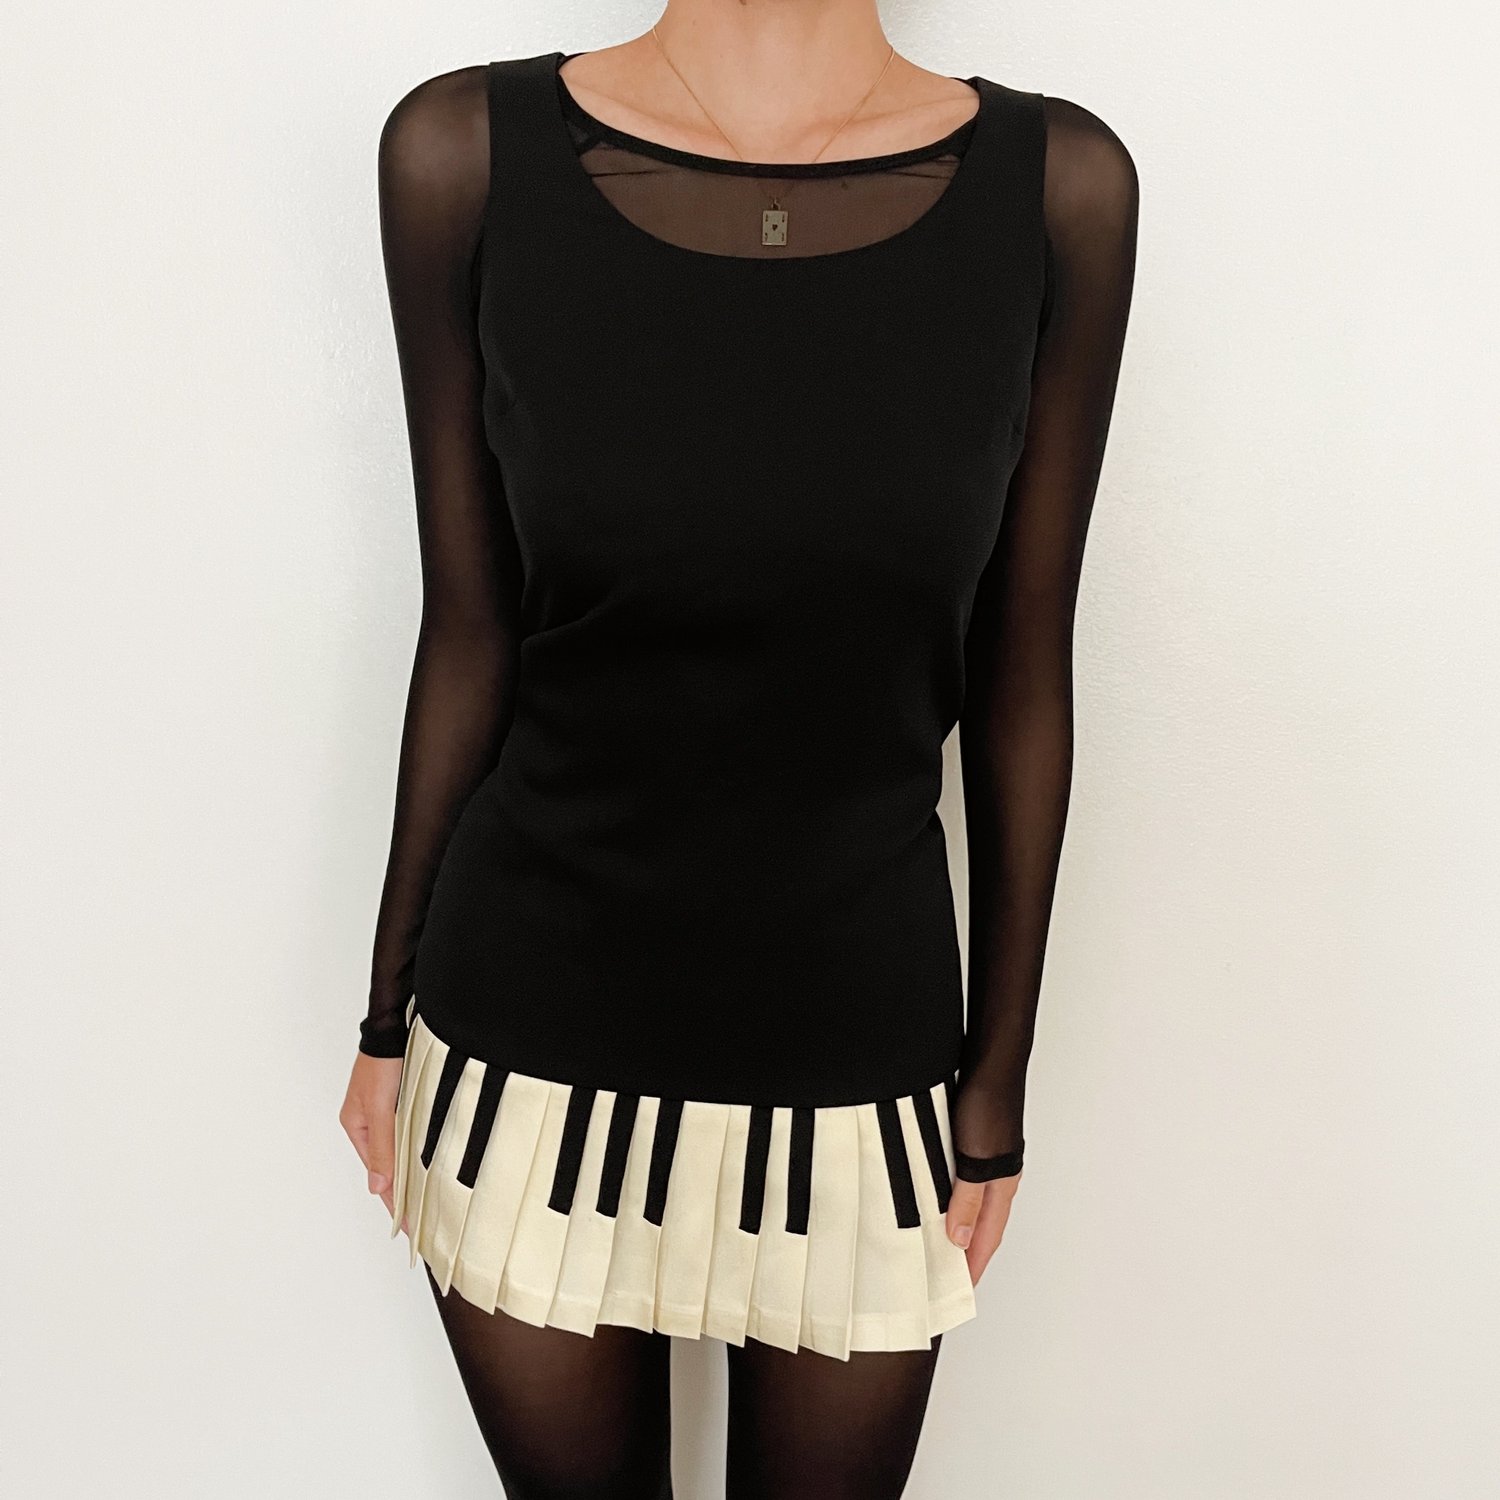 Moschino Vintage 1990's Iconic Piano Dress - As Seen On The Nanny (Medium) — sororité.